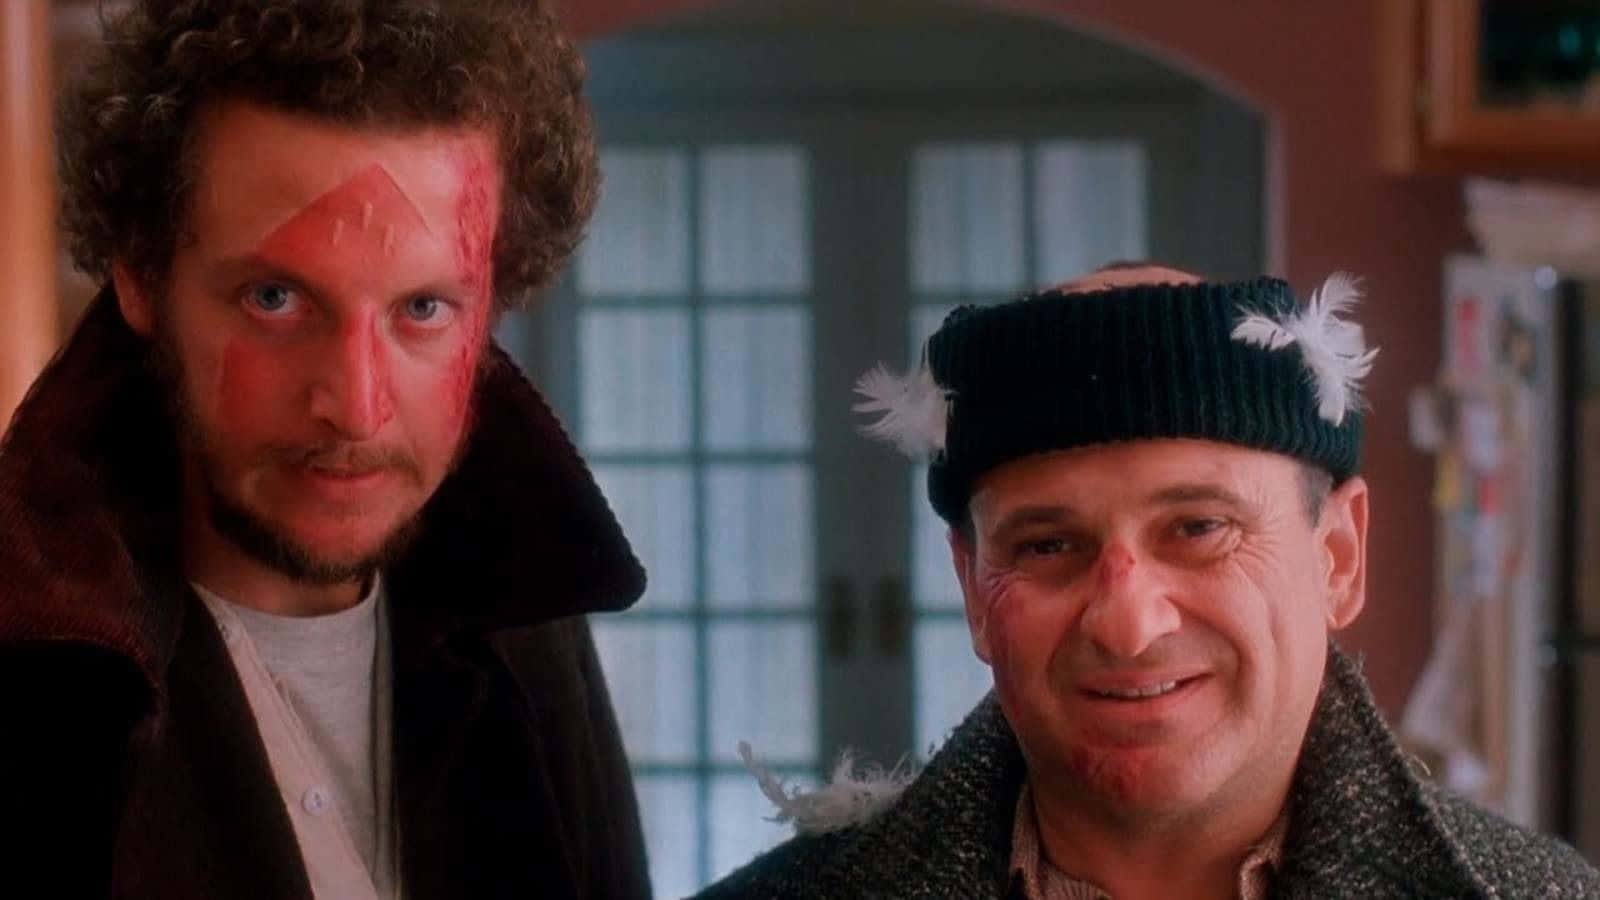 FaceTime frosting your screen with Home Alone scenes this holiday